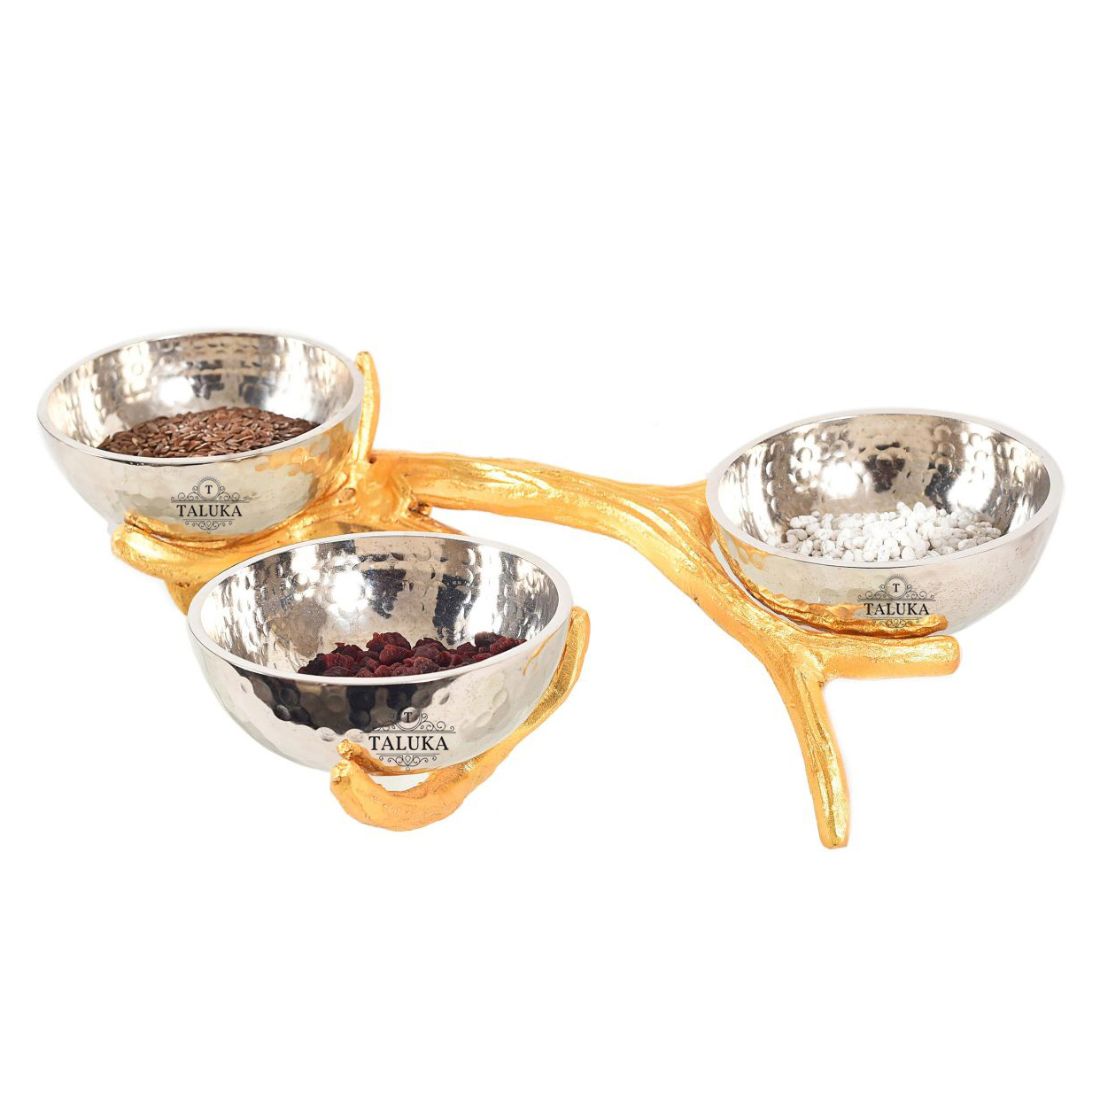 Stainless Steel Hammered Bowl Nickel Plating with Brass Stand 3 Pcs Set Serving ware Home Decor Handicraft Gifted Item Bowl